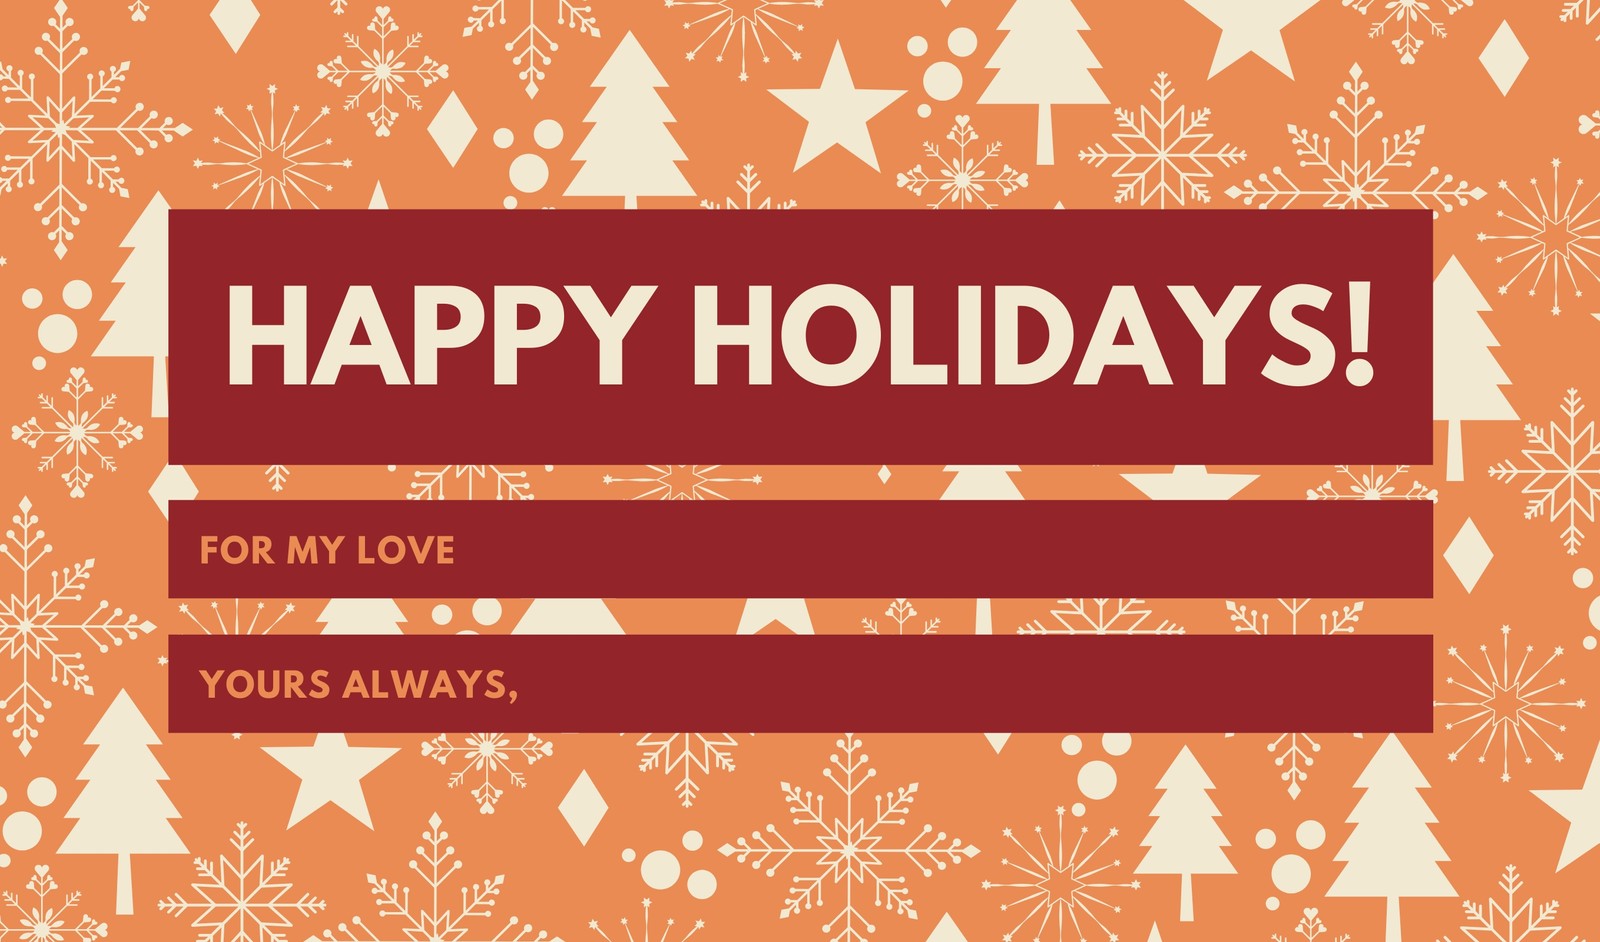 Free and customizable holiday gift tag templates